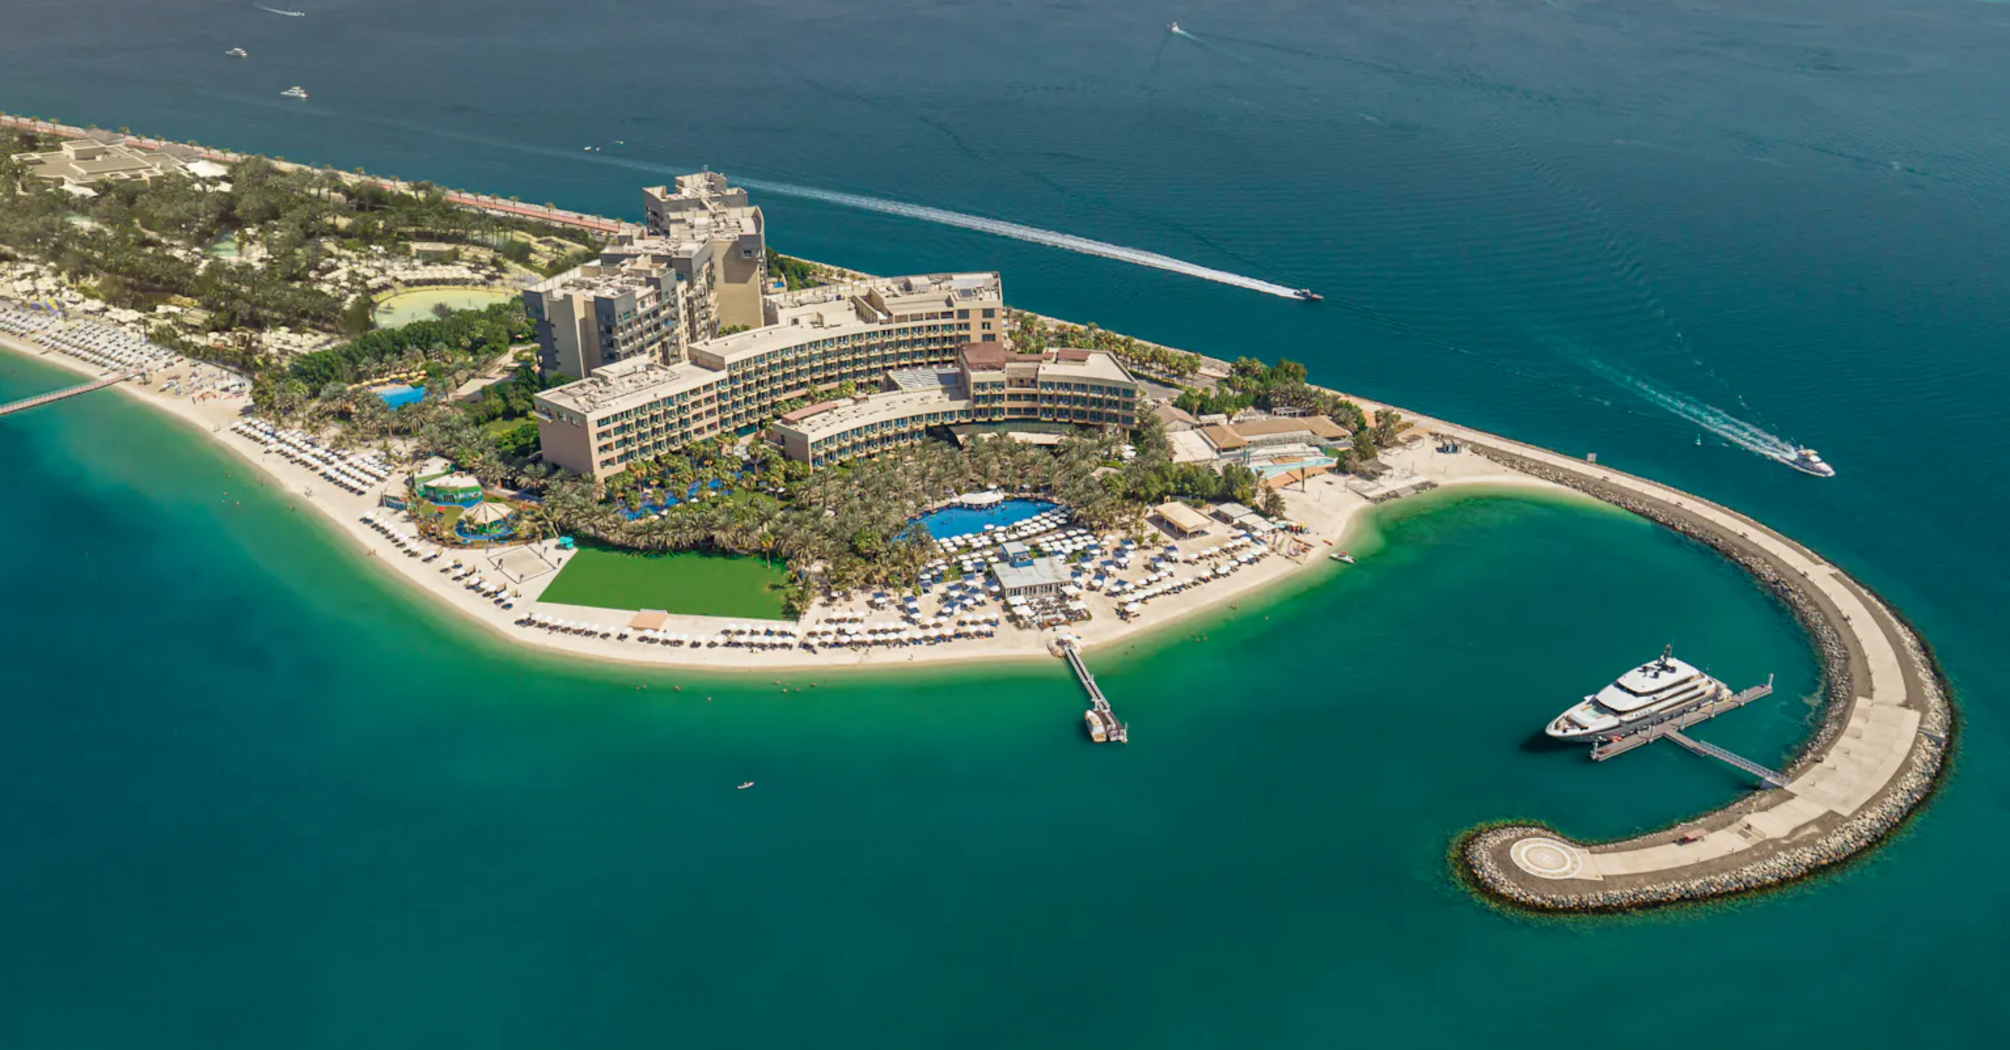 Best Beach: Rixos hotel in Dubai has been awarded the Blue Flag certificate